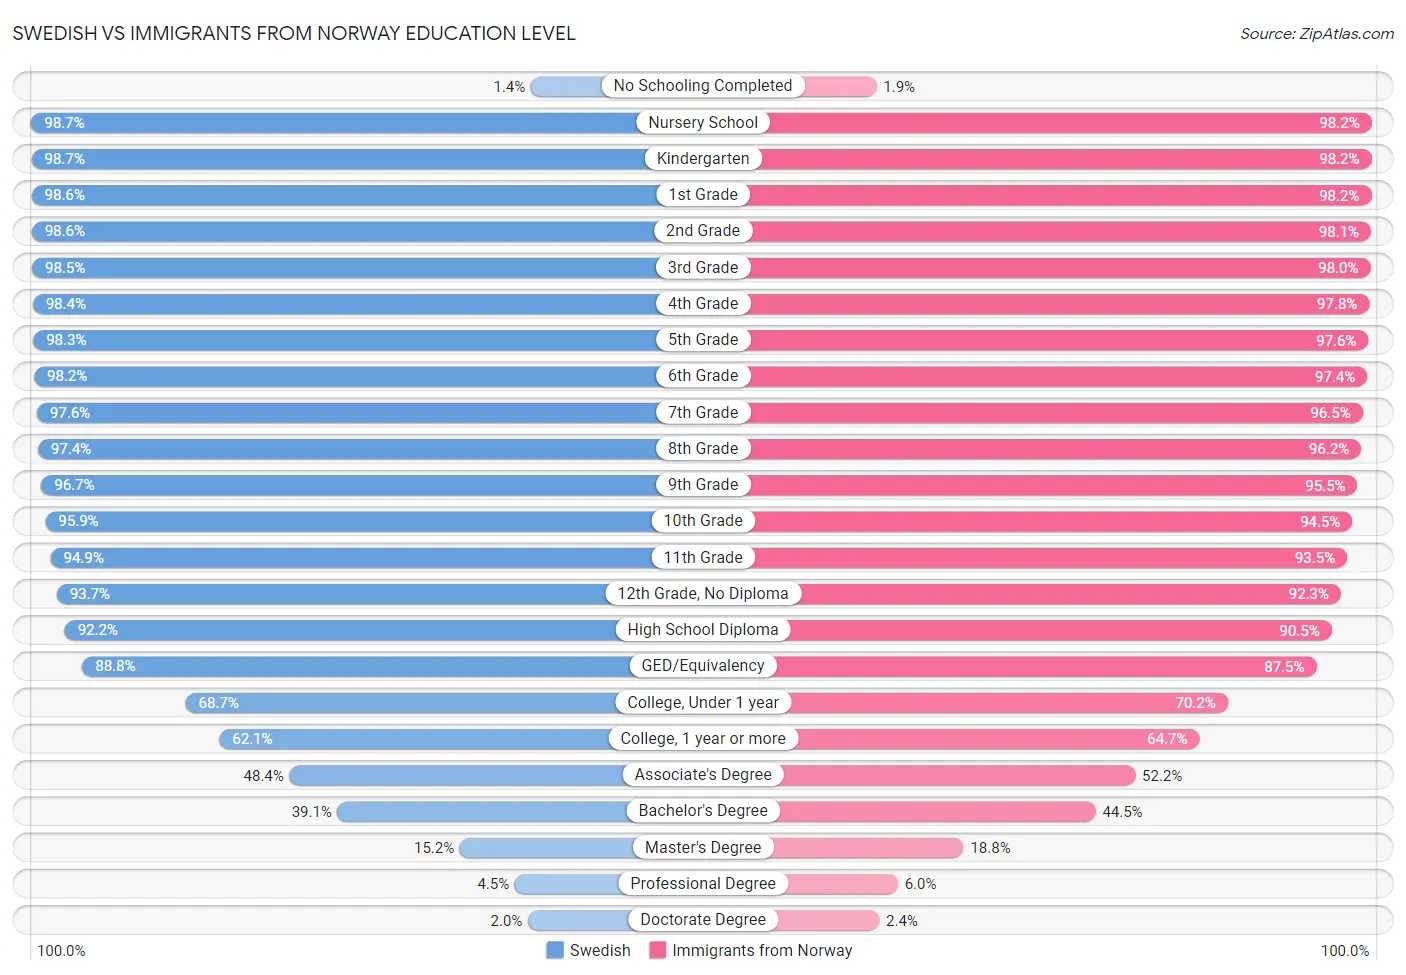 Swedish vs Immigrants from Norway Education Level